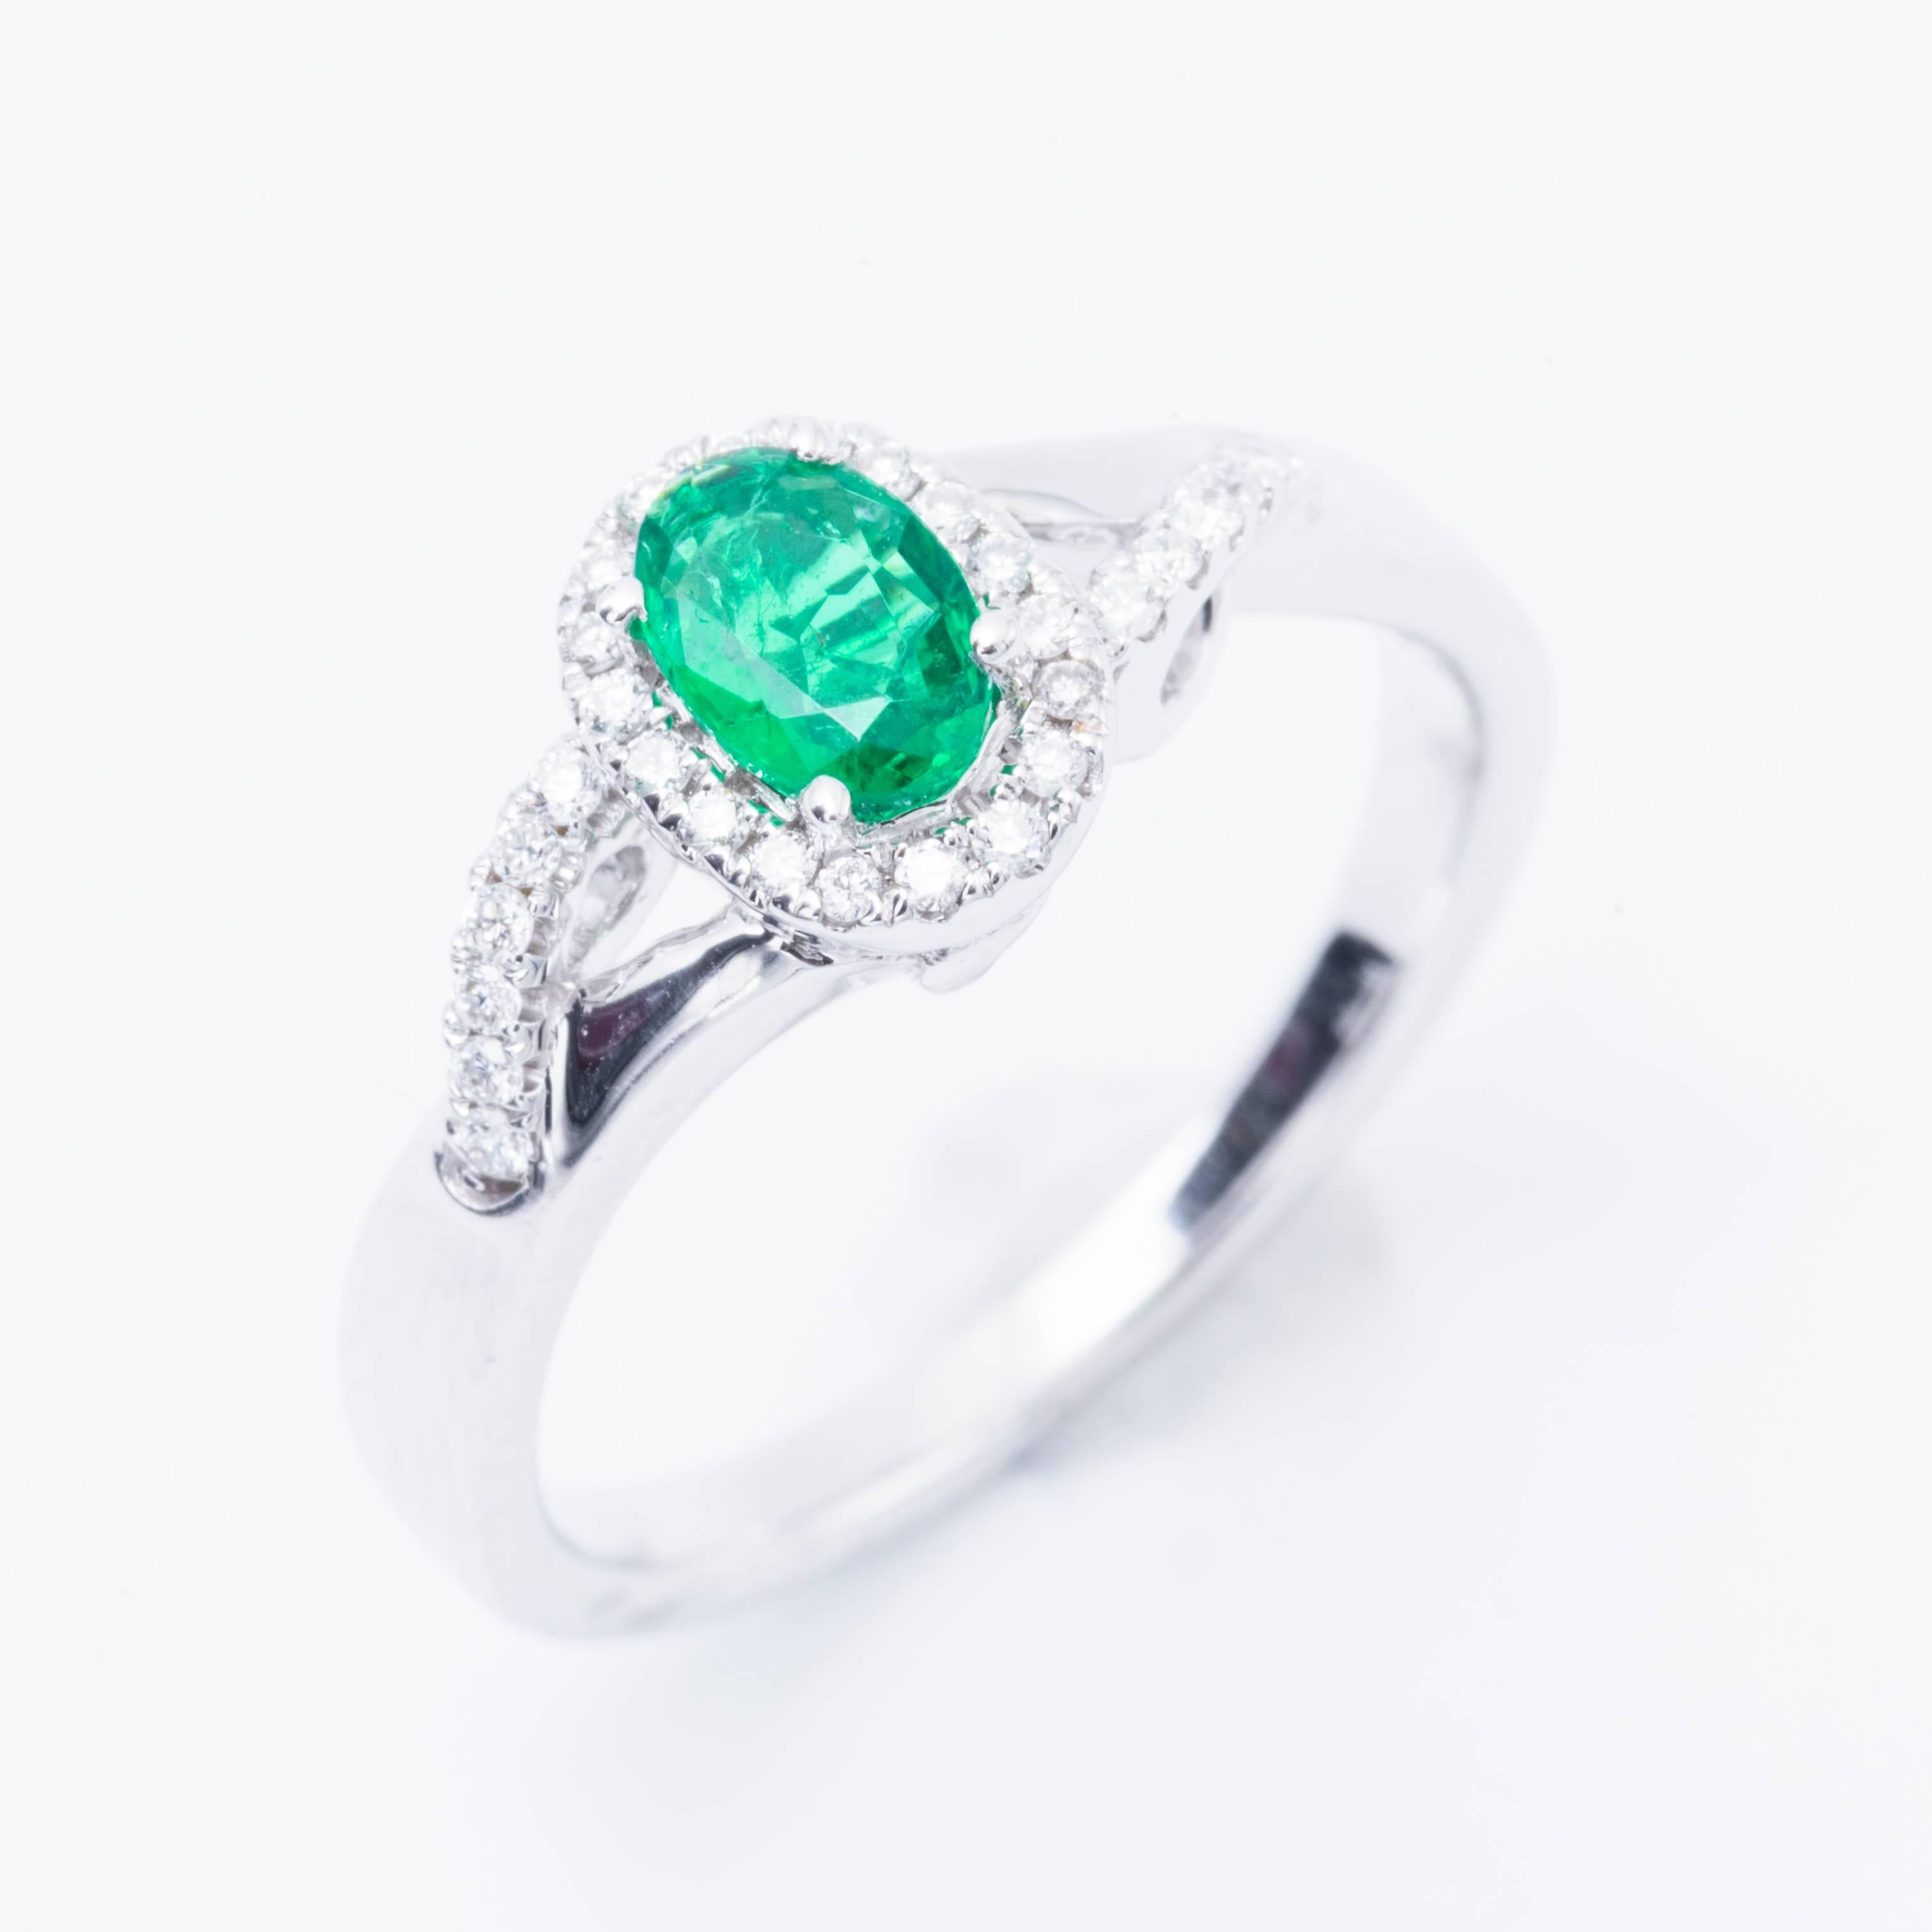 14 Karat white gold 
Emerald Weight: 0.43 cts. 6x4 mm
Diamonds Weight: 0.14 cts.
Beautiful very well made, classy and elegant.All our Gemstones are genuine, and are sourced with the highest degree of integrity.
